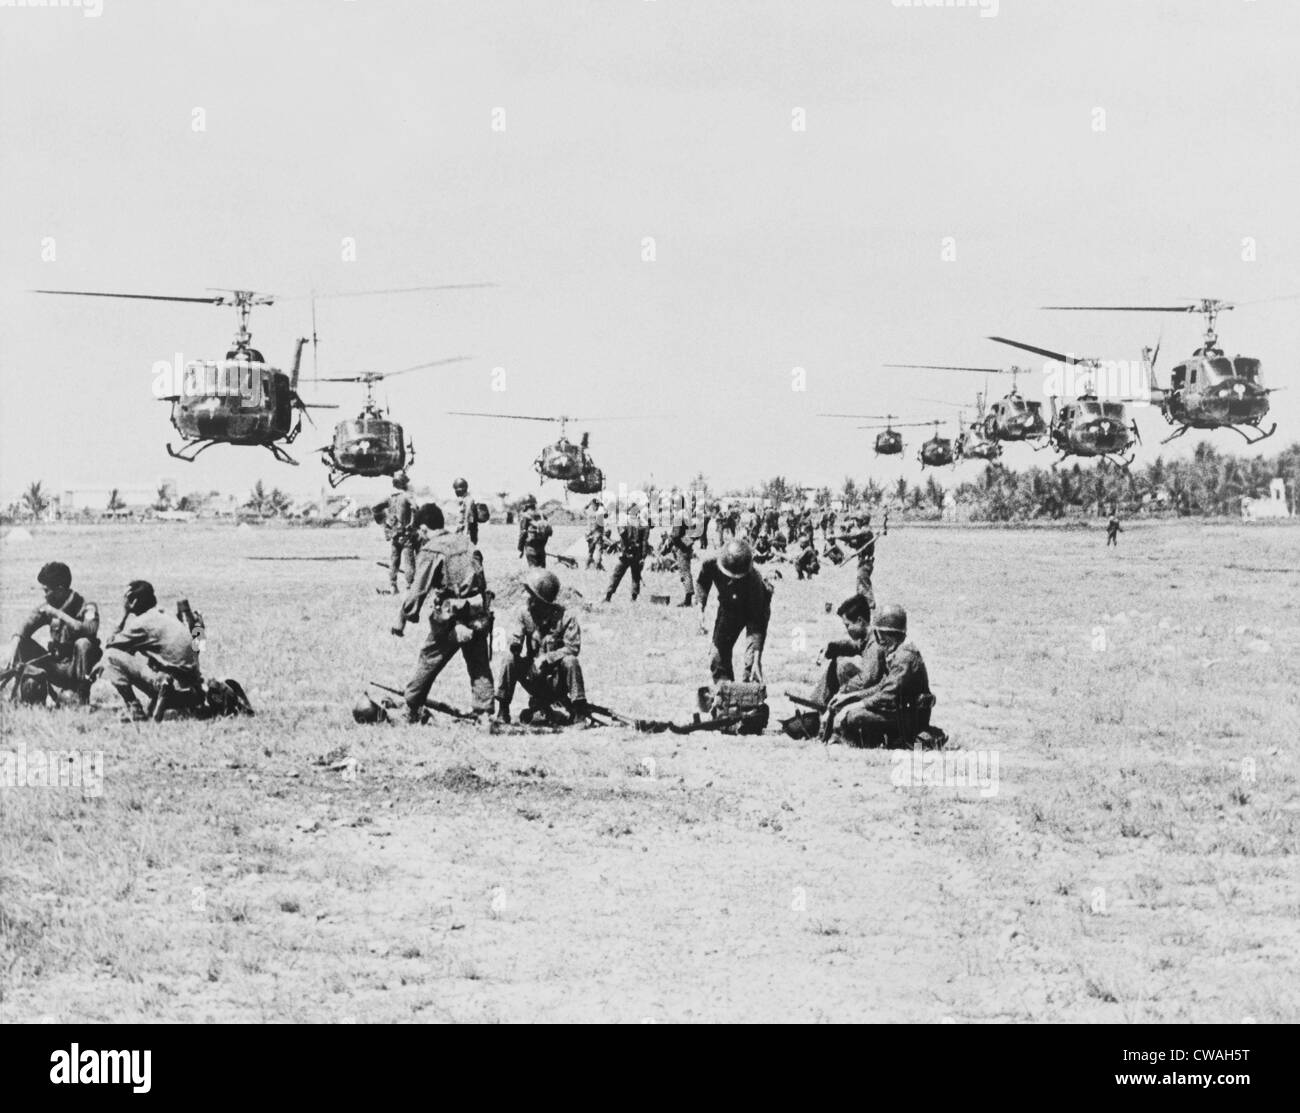 United States helicopters air lift Vietnamese government Rangers into battle against communist Viet Cong guerrillas, Saigon. Stock Photo